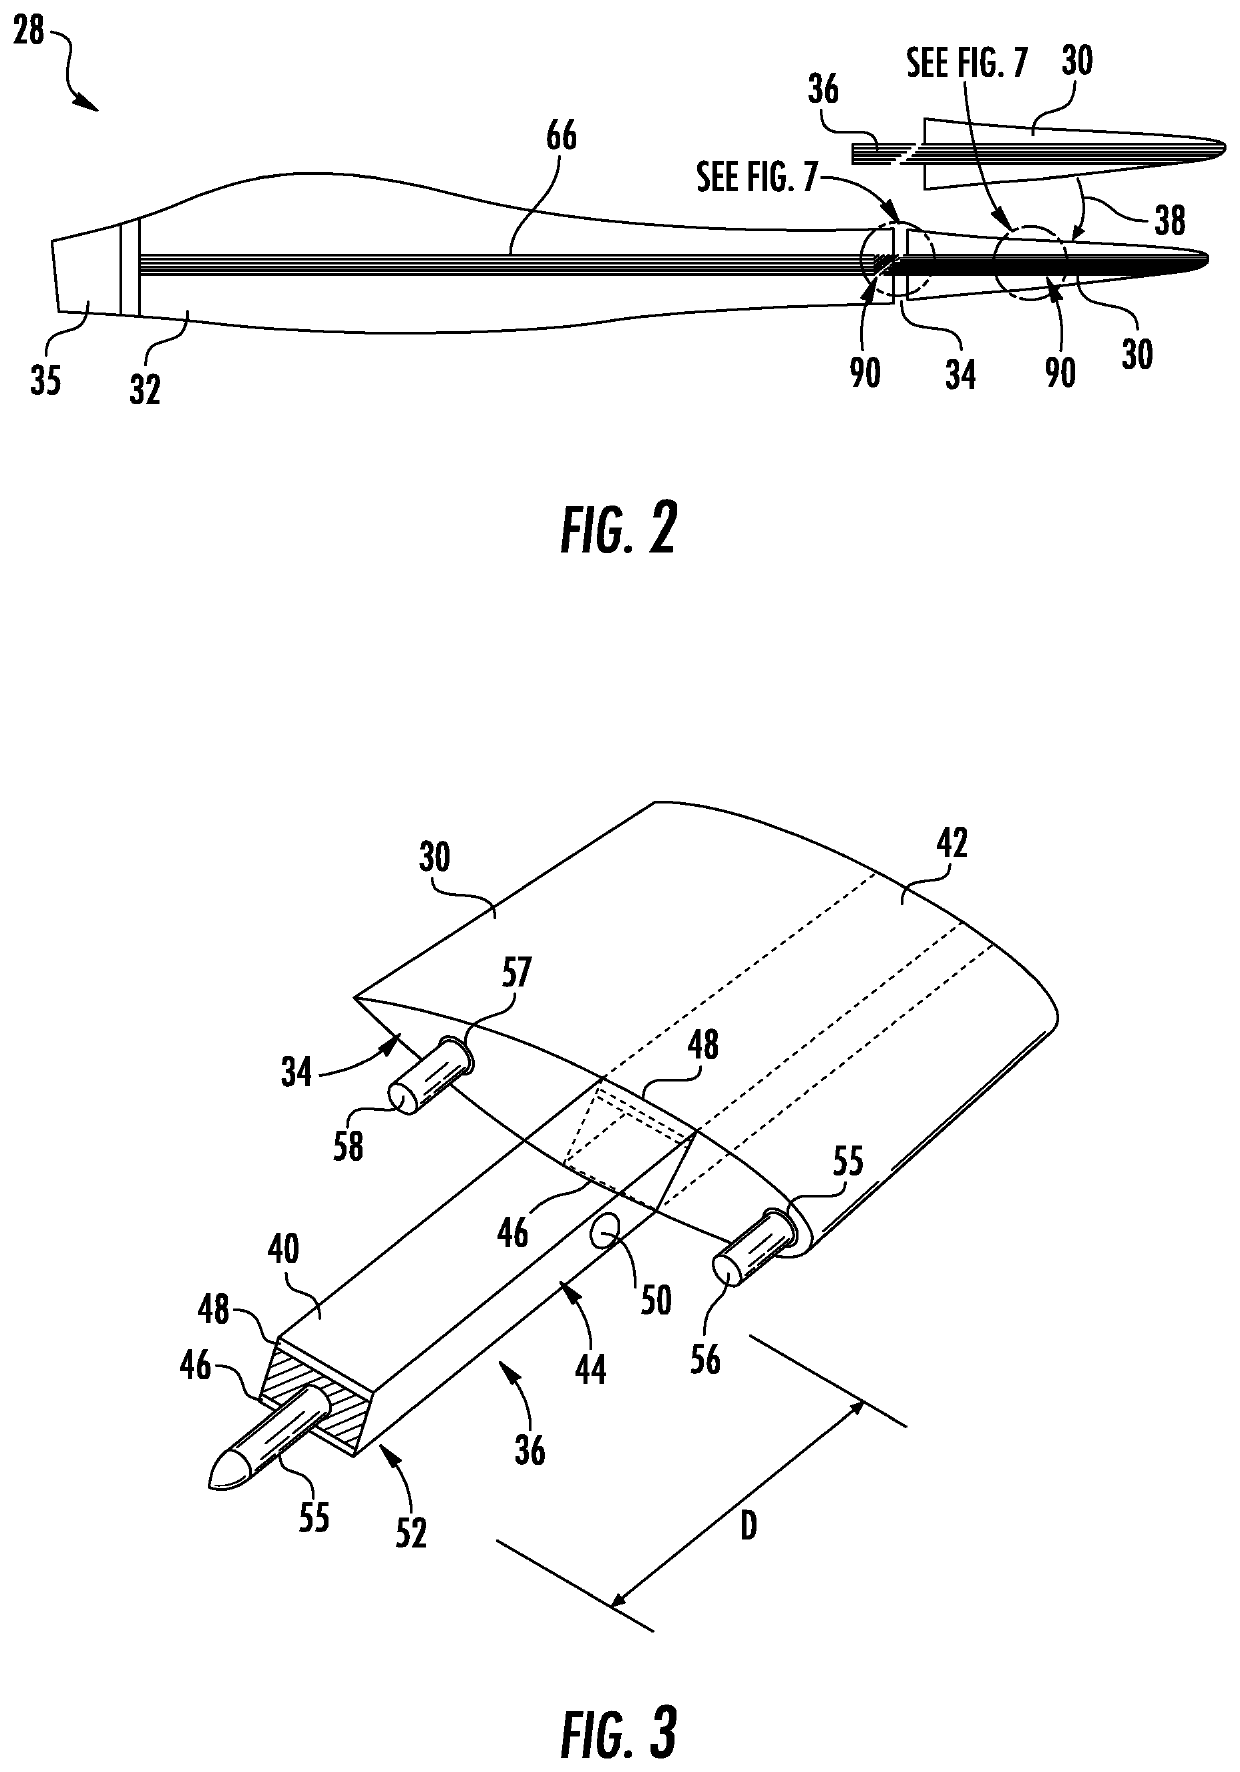 Scarf connection for a wind turbine rotor blade